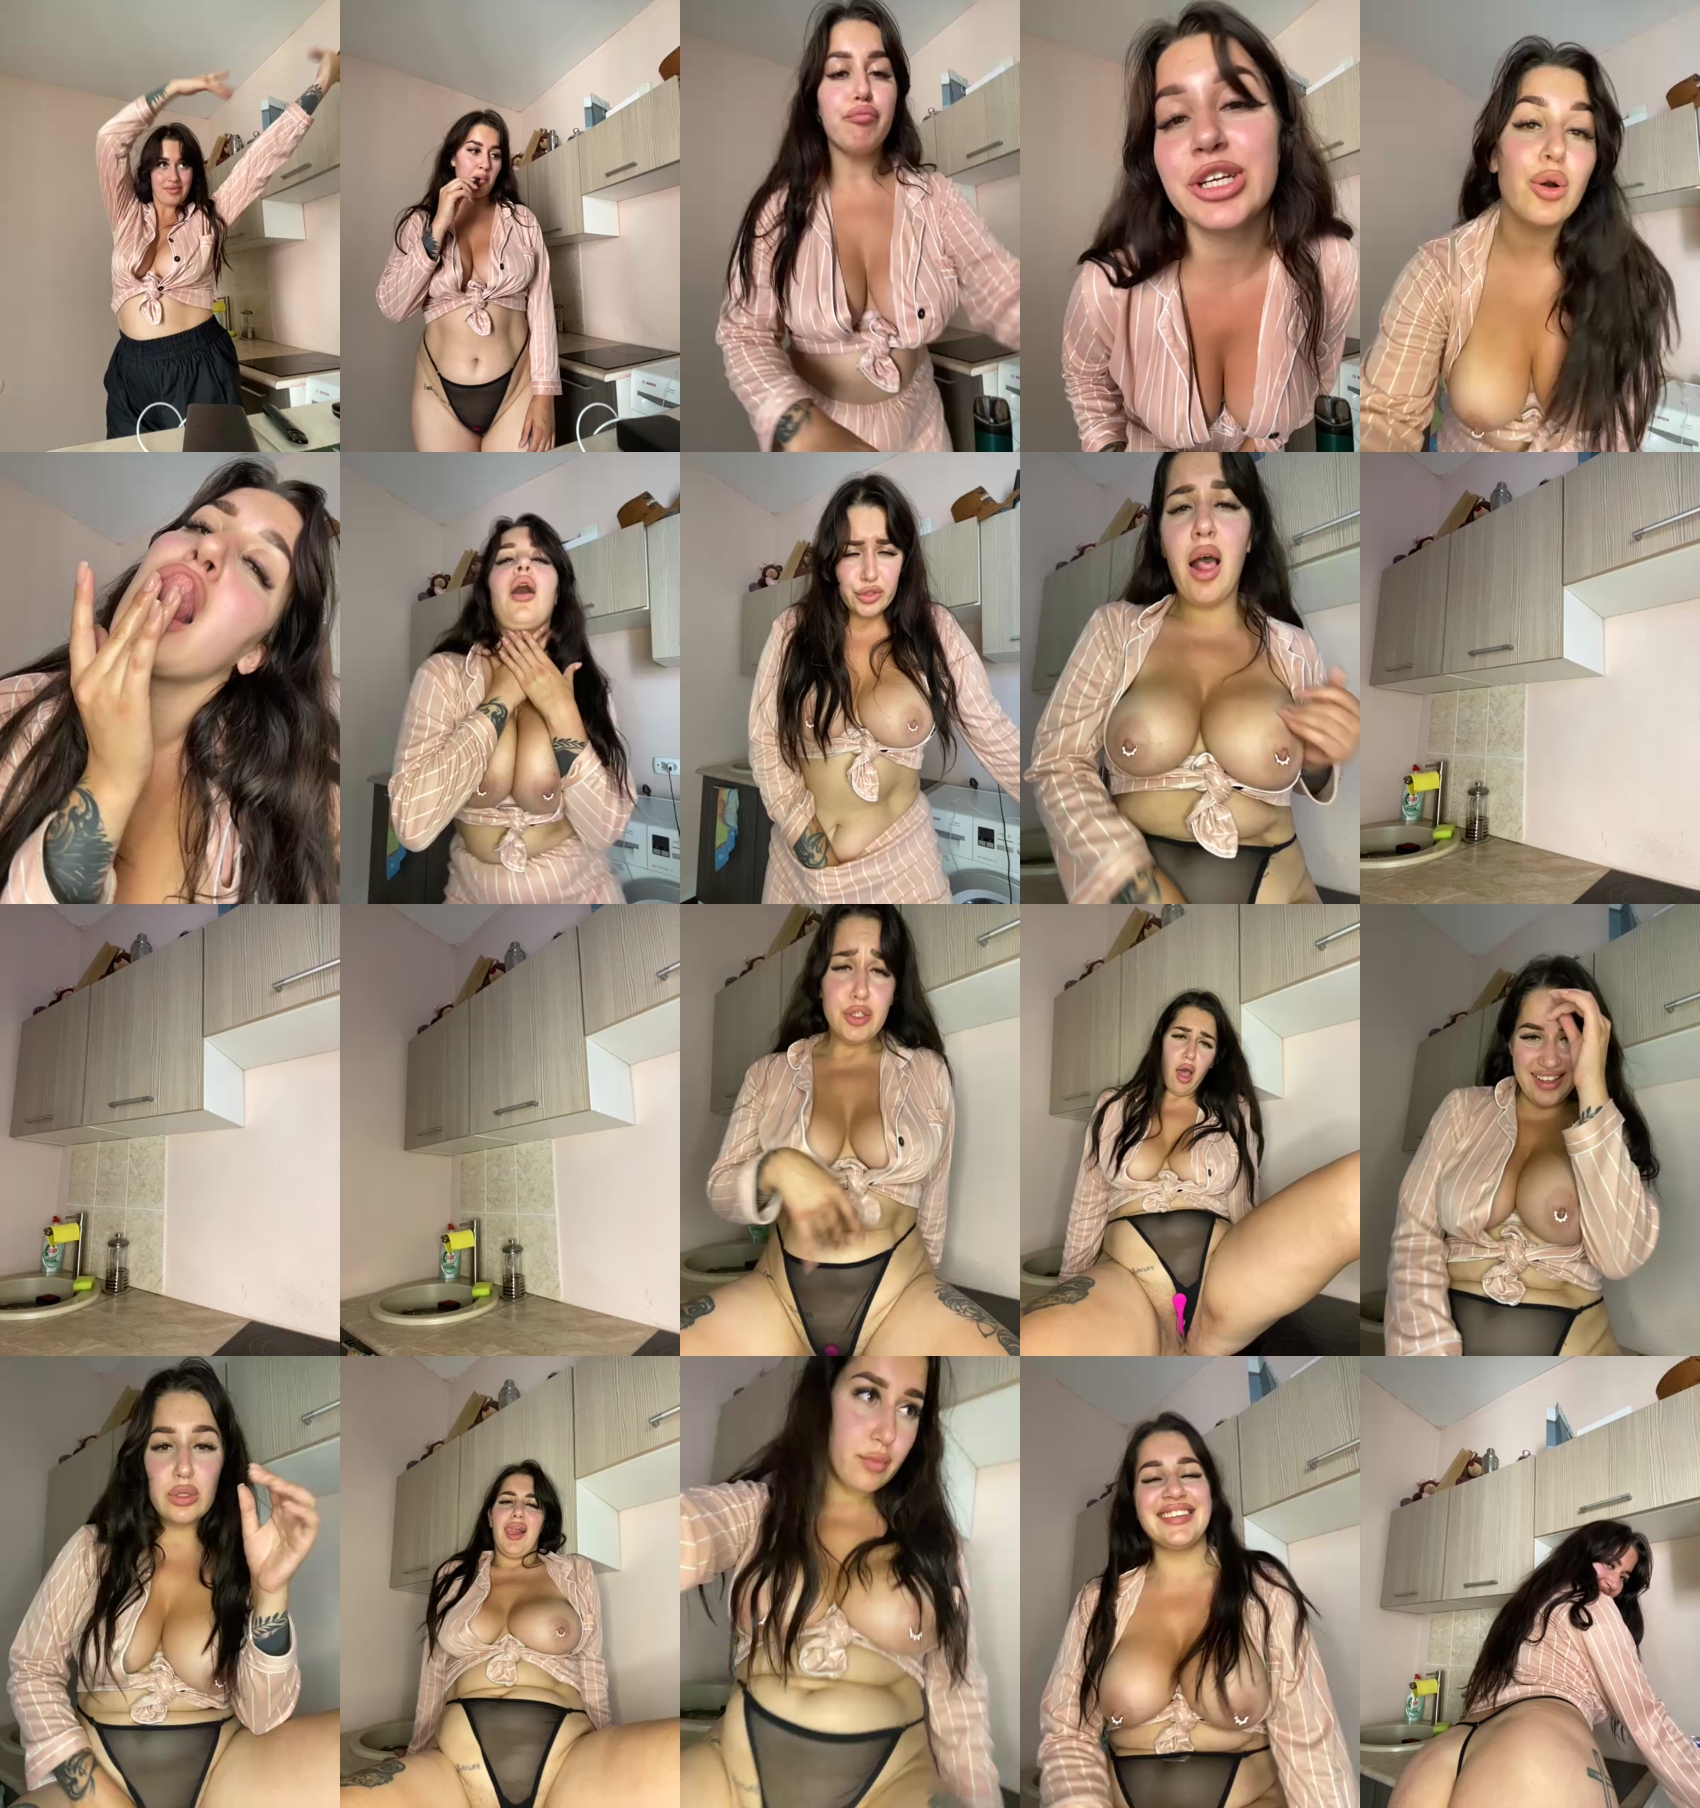 Recorded Camshows